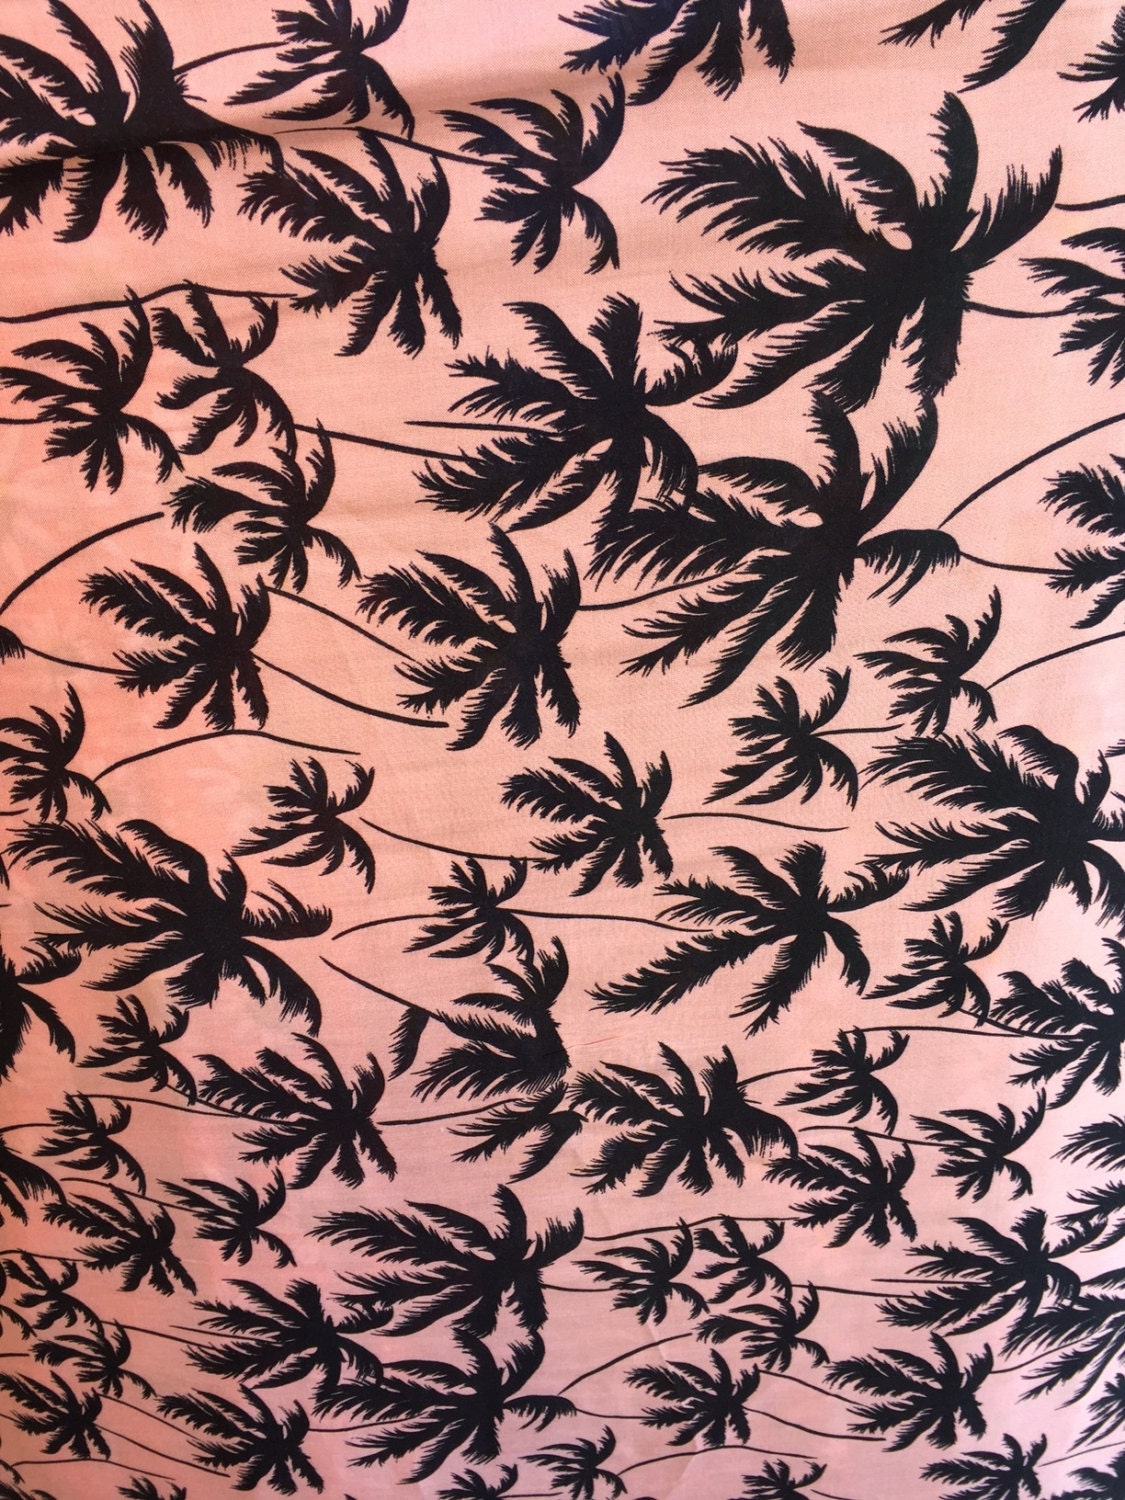 100% rayon challis Palm trees on Tuscan pink background soft tropical flowy fabric sold by the yard dress